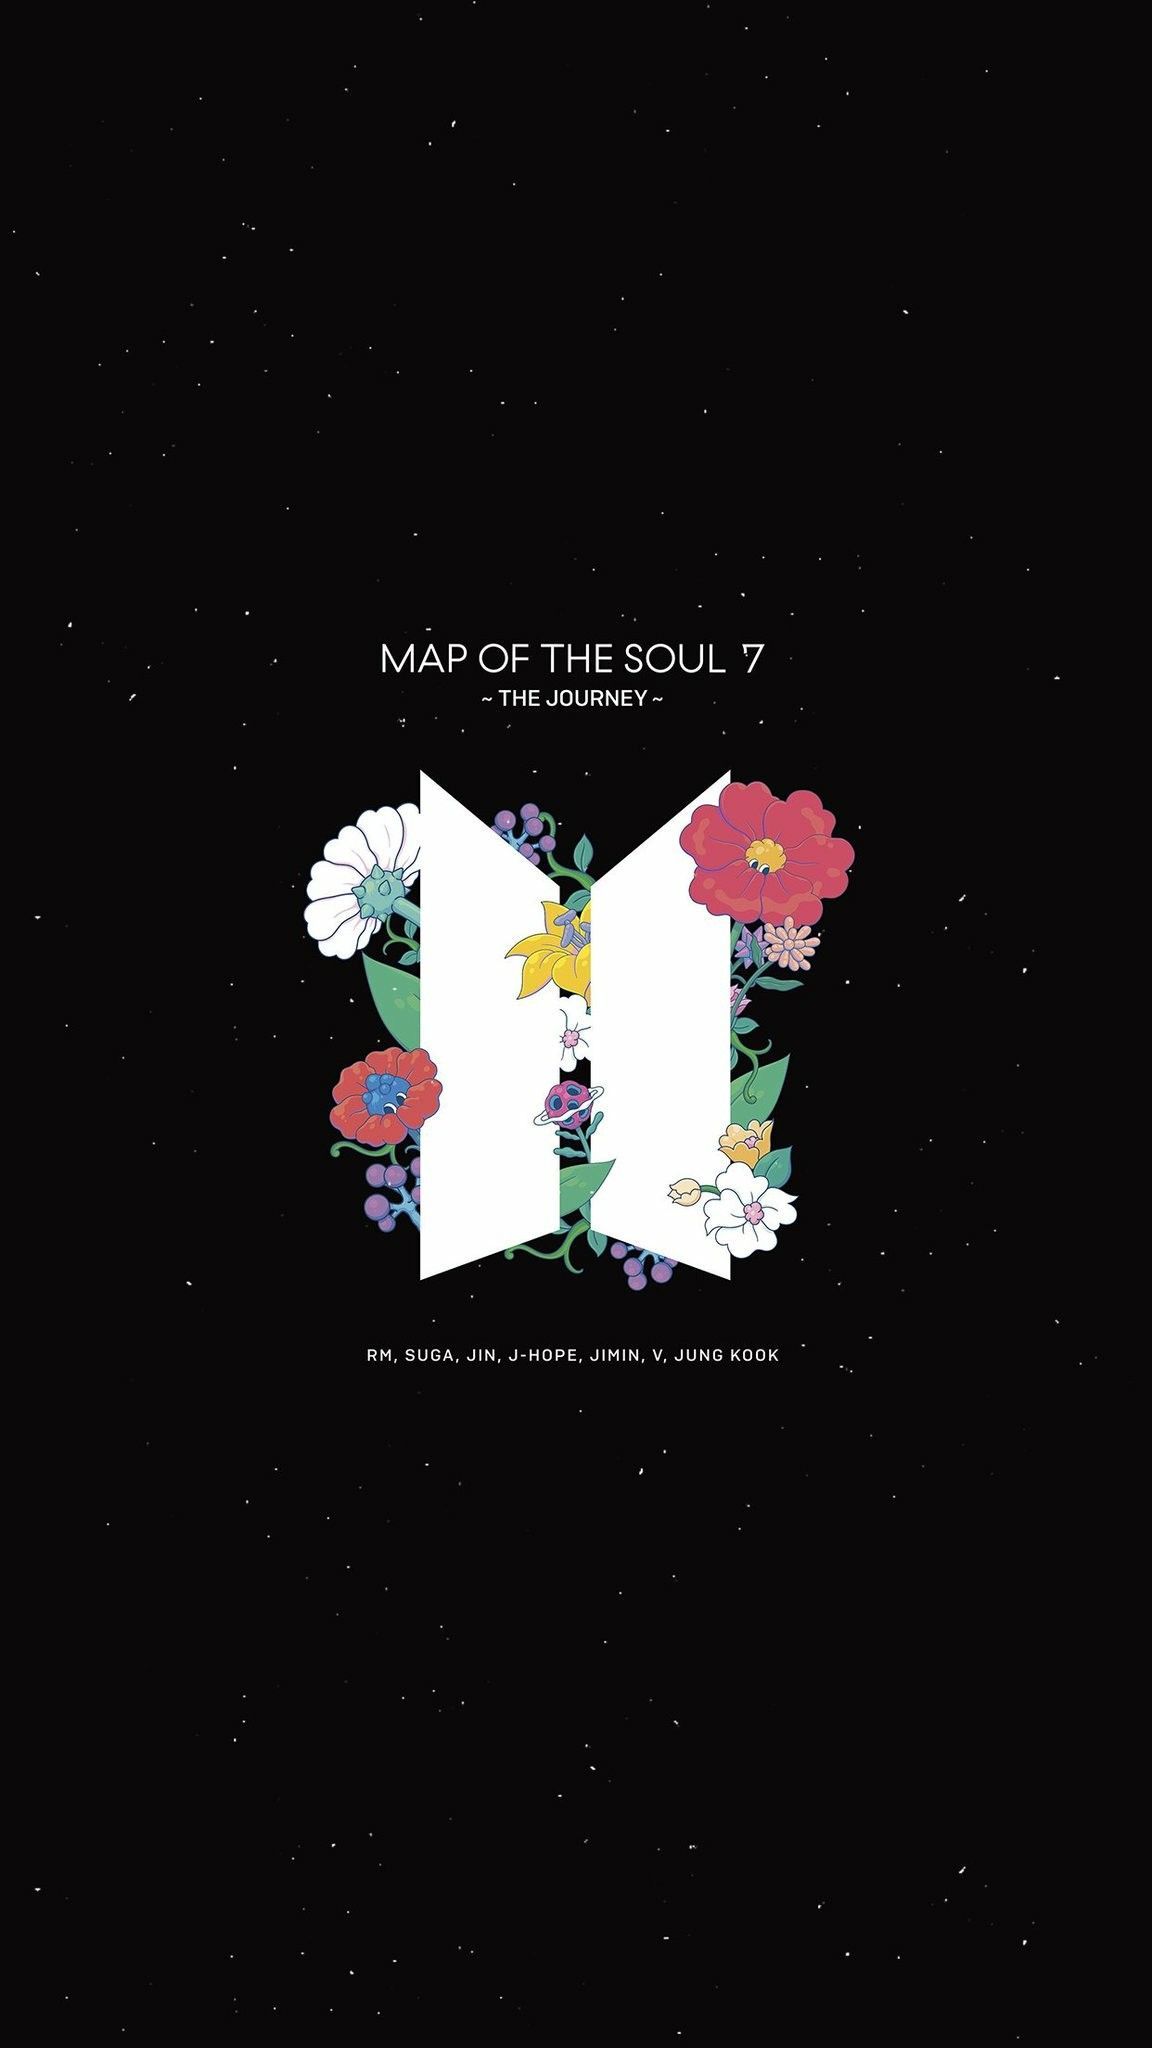 BTS JAPANESE ALBUM. MAP OF THE SOUL 7, THE JOURNEY. WALLPAPERS